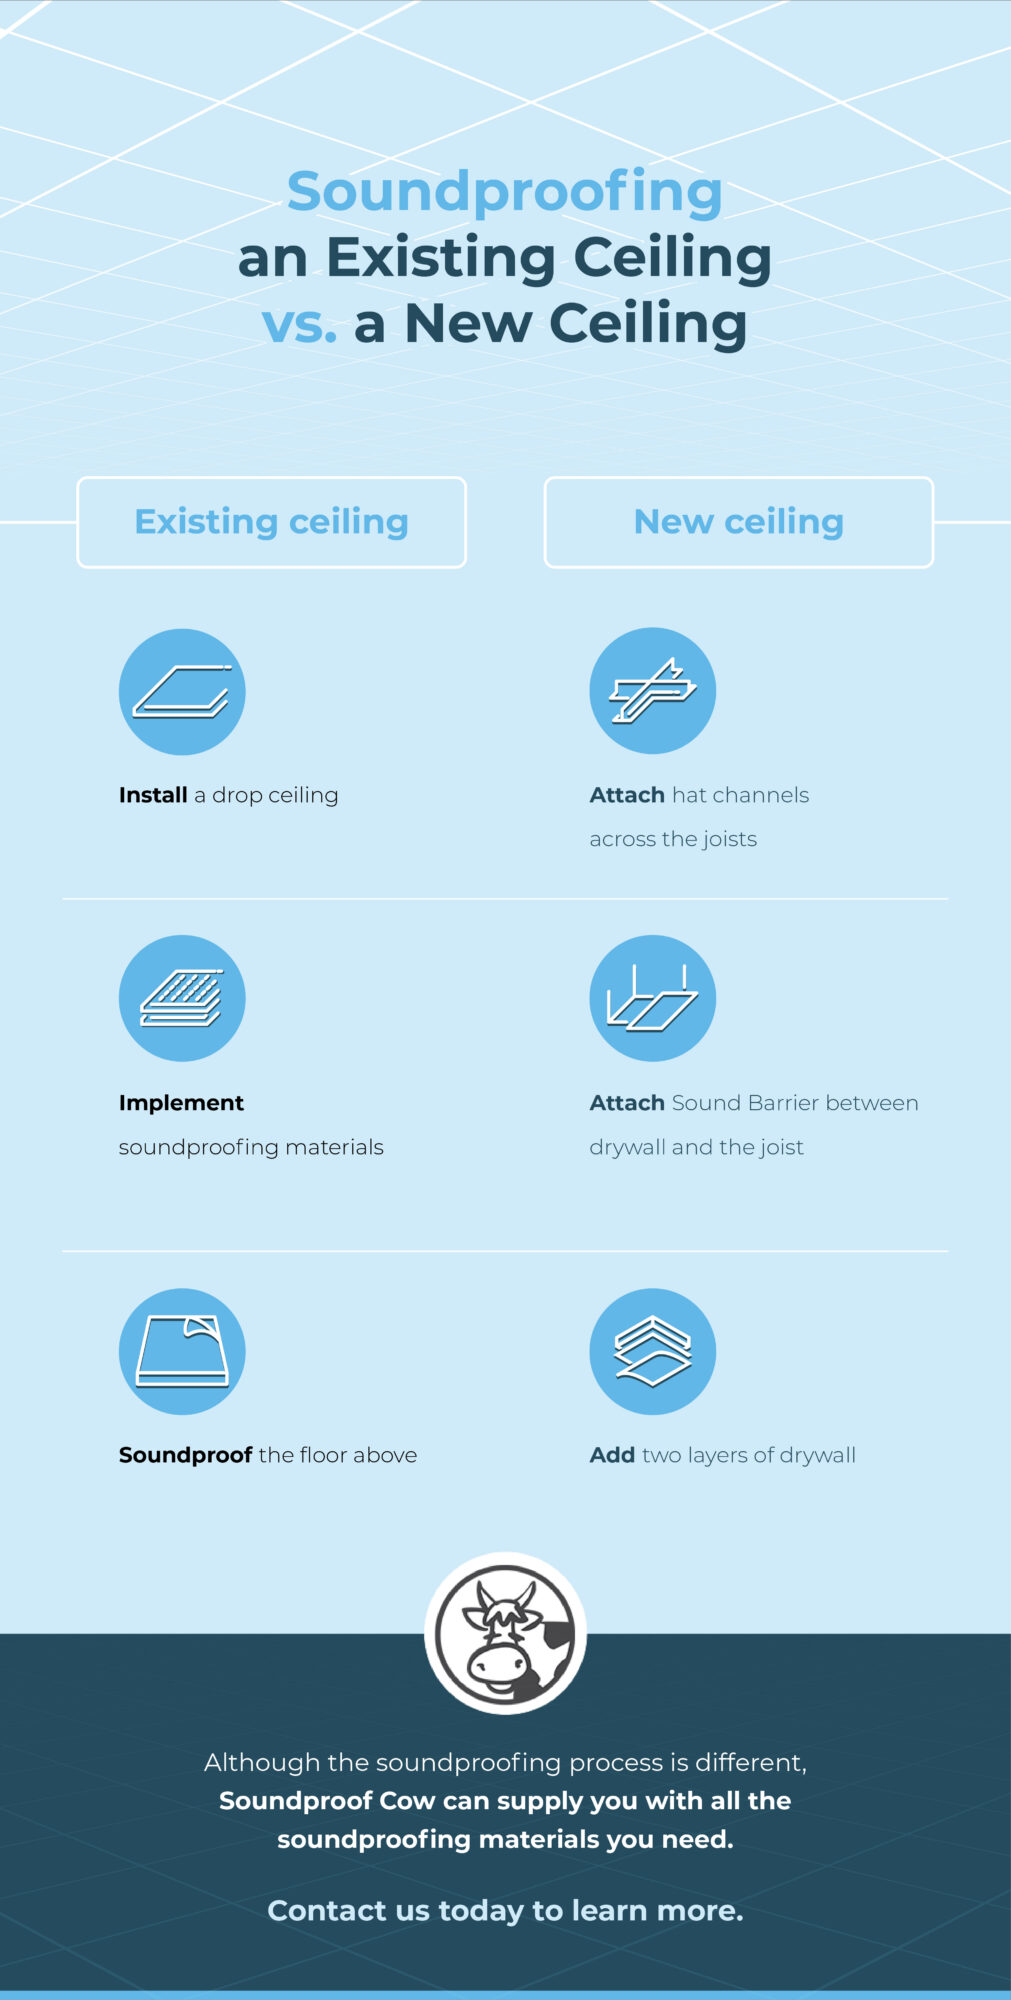 Soundproofing an Existing Ceiling vs a new Ceiling